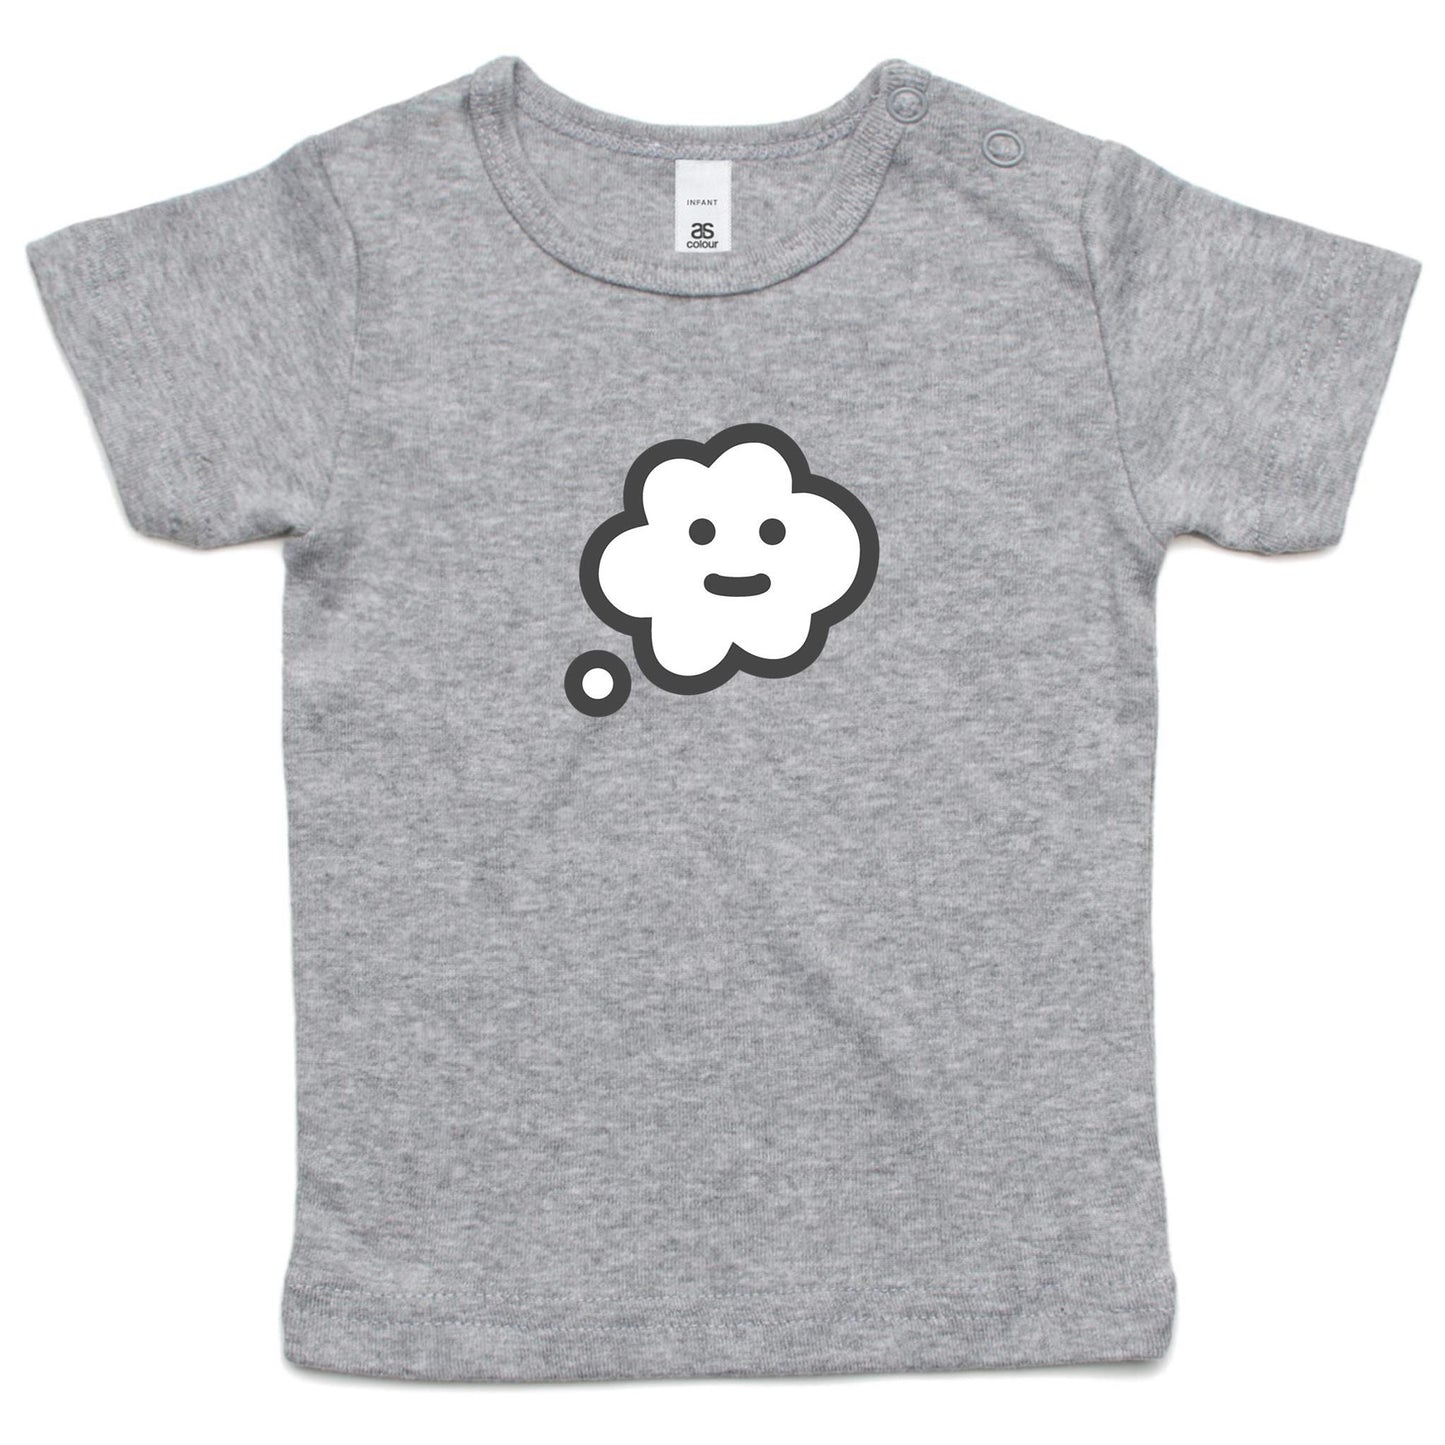 Thought Bubble Face T Shirts for Babies